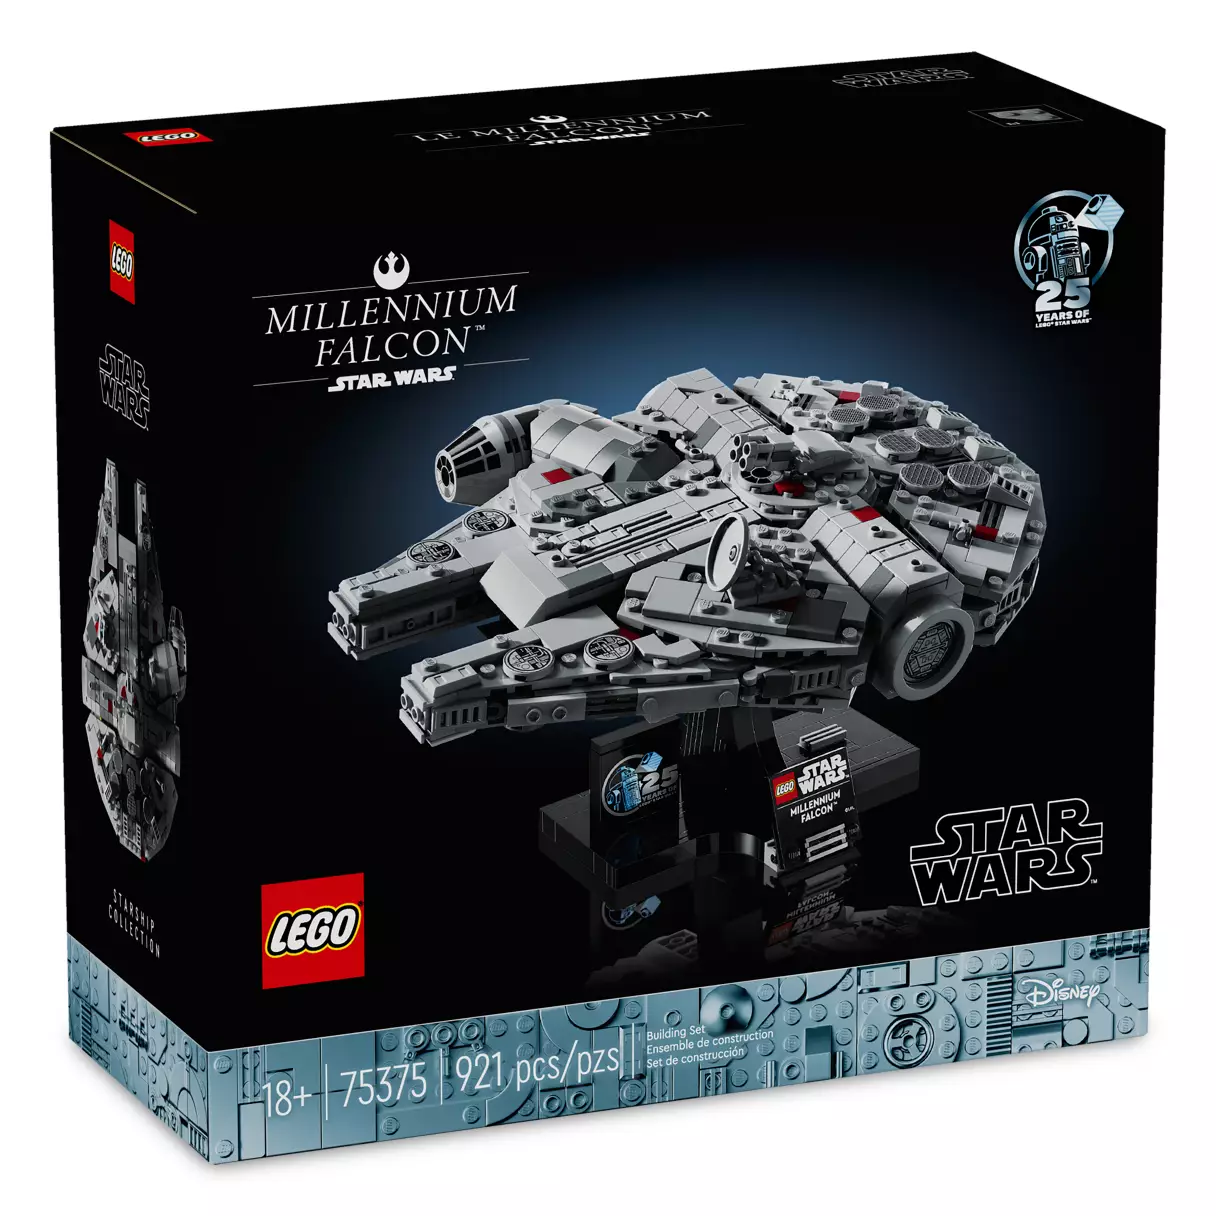 ANH Millennium Falcon Build-and-Display Starship Model Lego Set 1